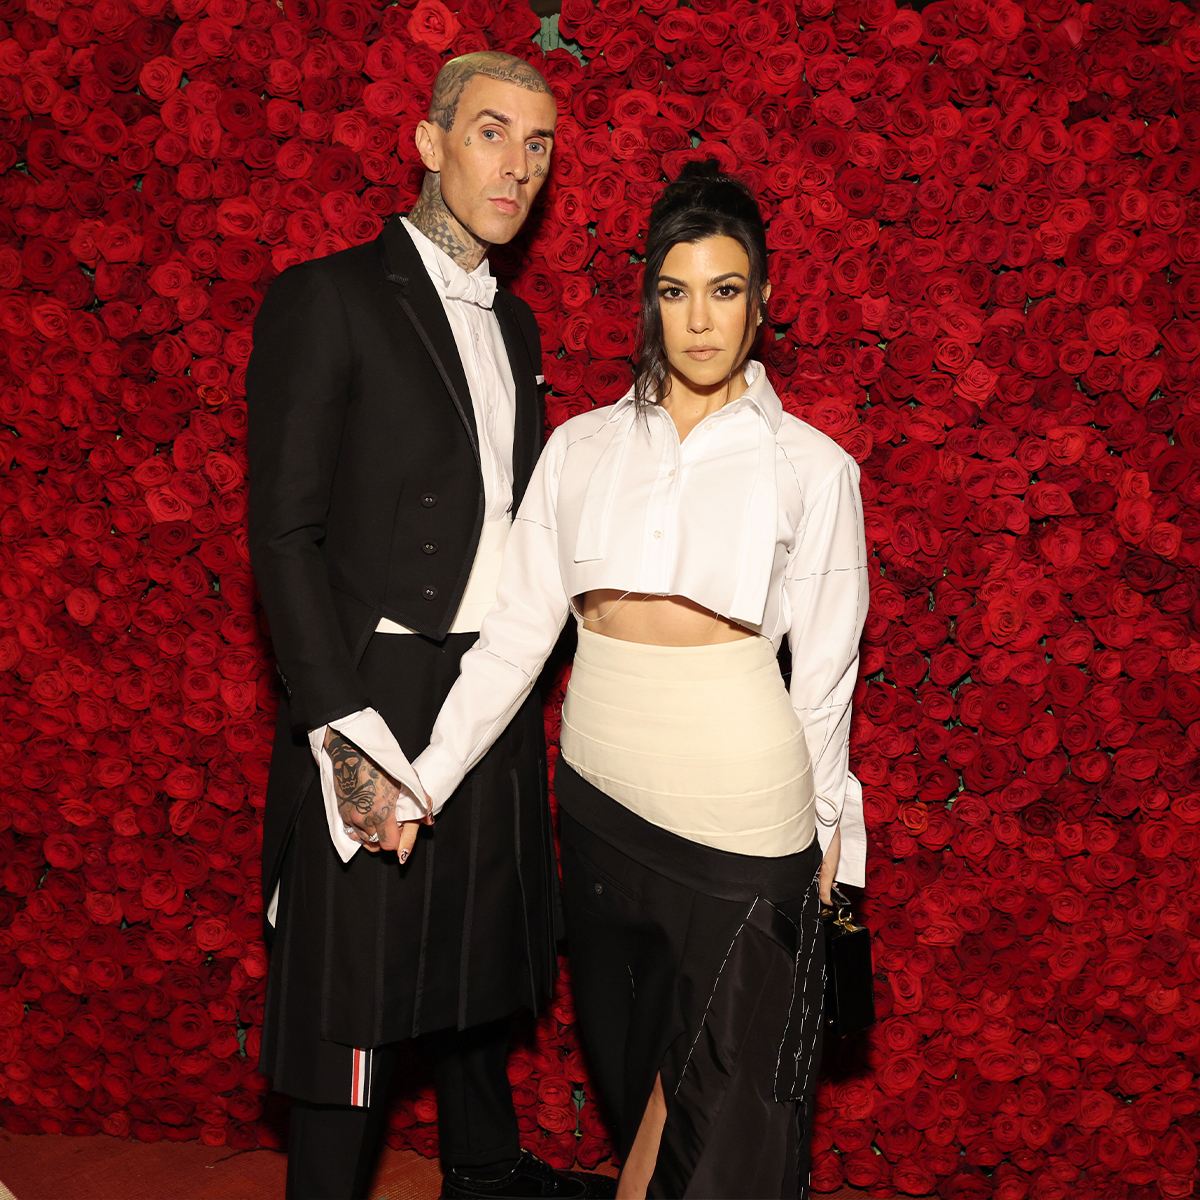 How Kourtney and Travis Barker Are Feeling Amid His Hospitalization